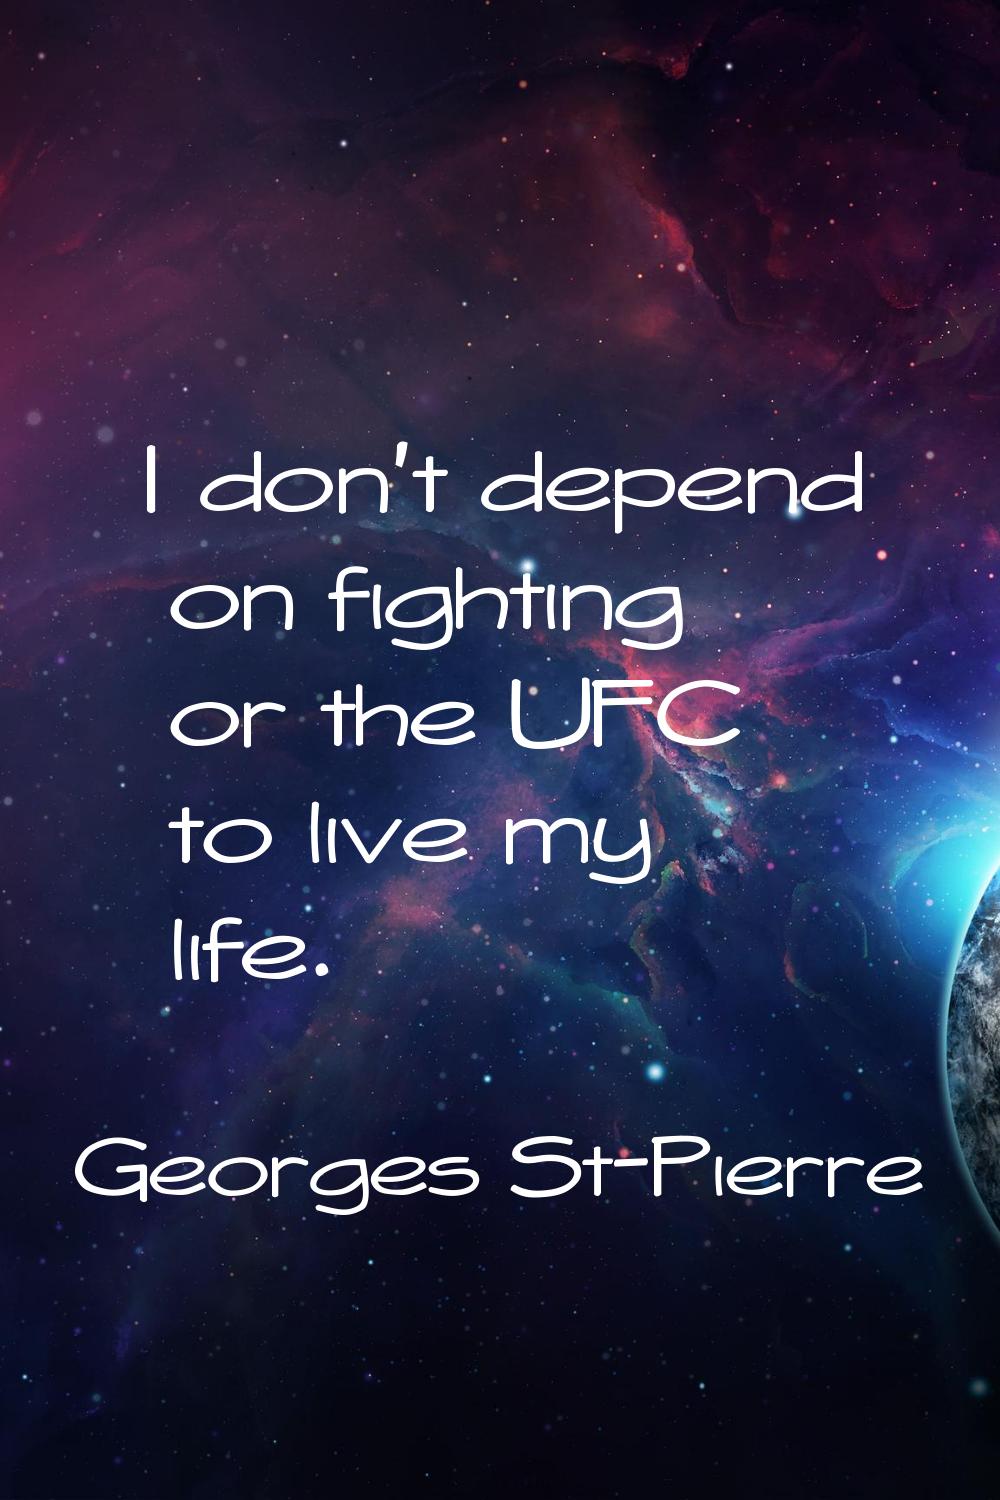 I don't depend on fighting or the UFC to live my life.